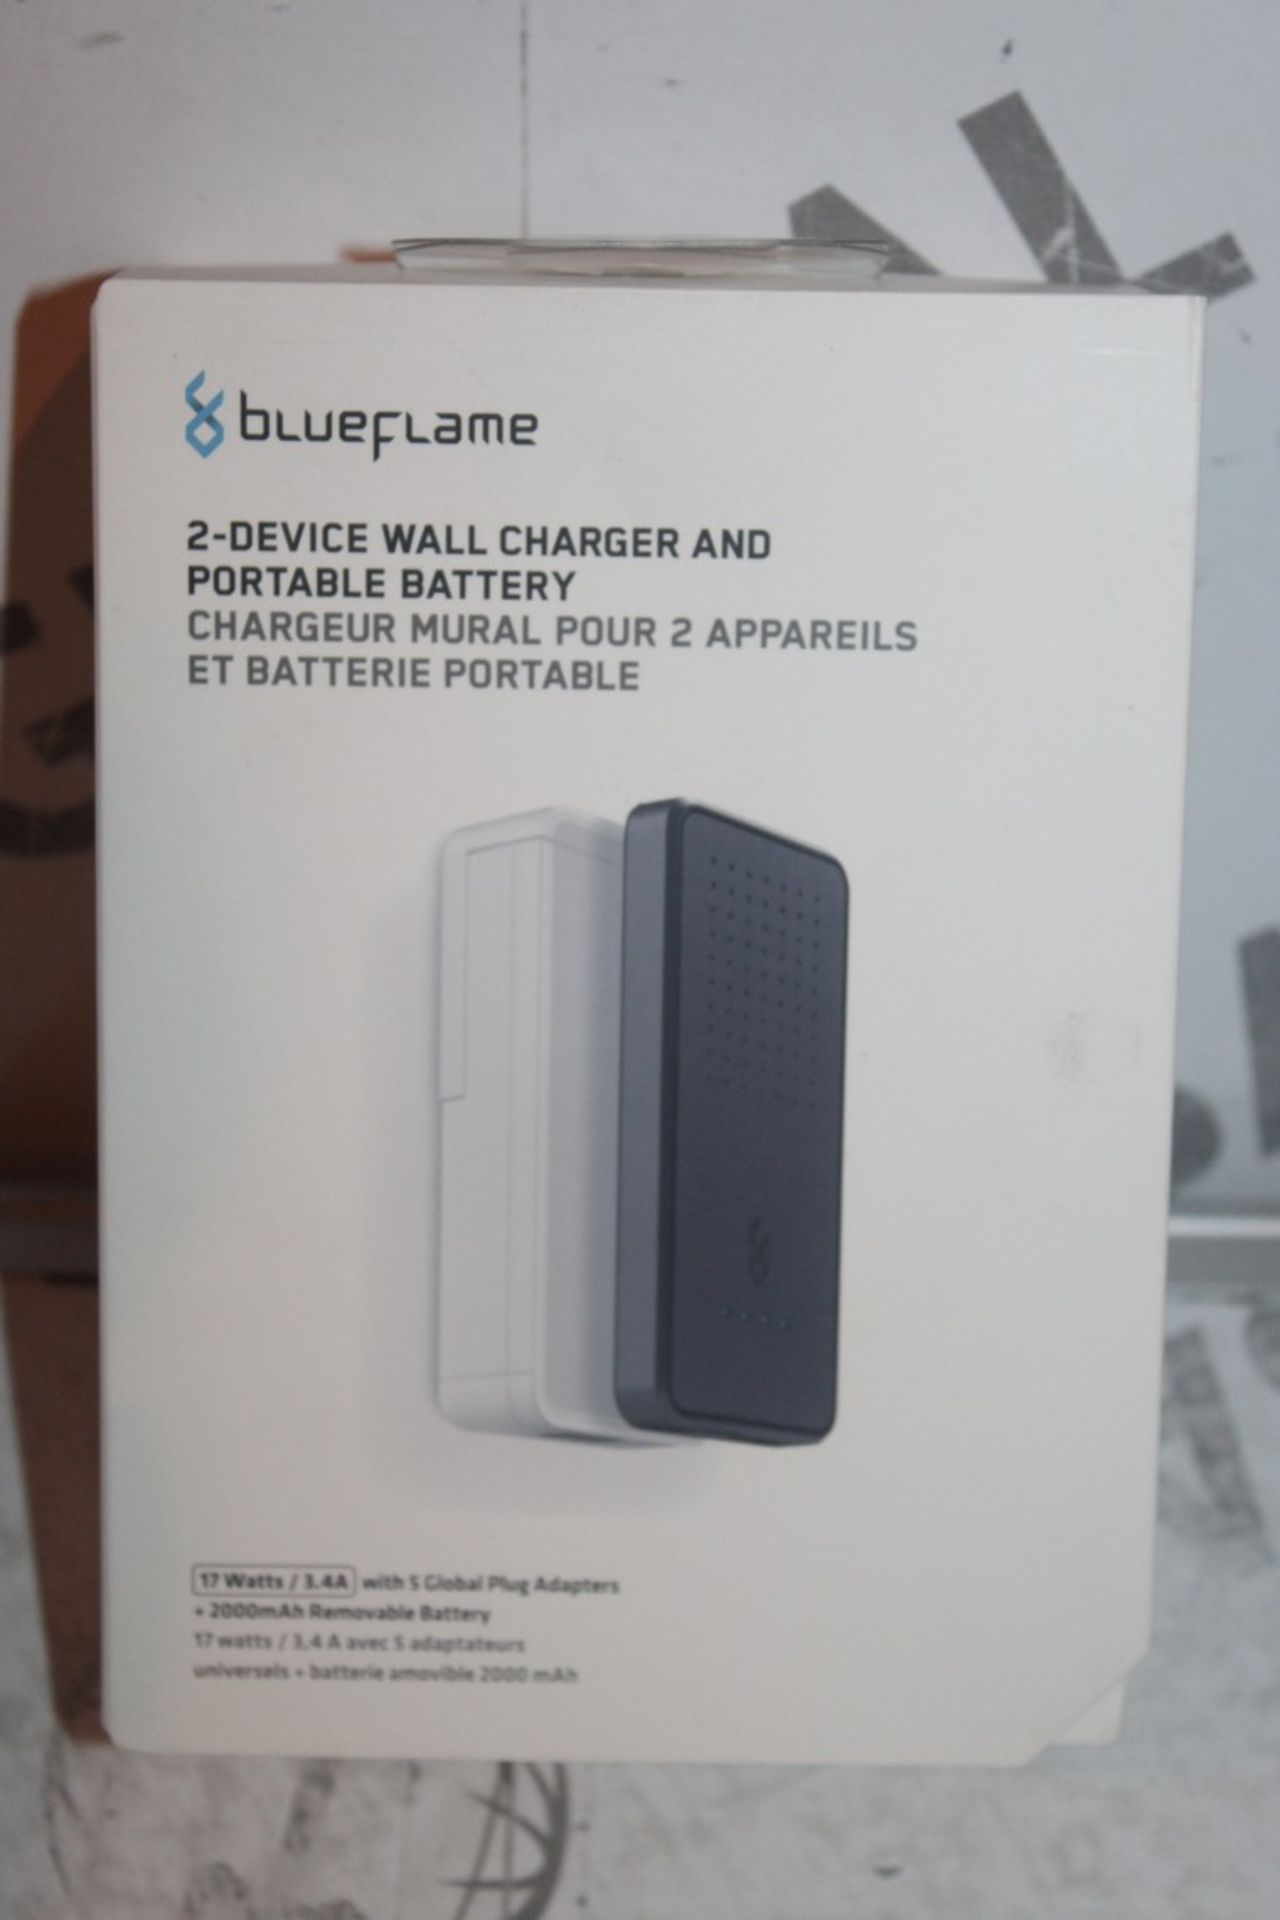 Boxed Brand New Blue Flame World of Power 2 Device Wall Charger and Portable Battery RRP £45